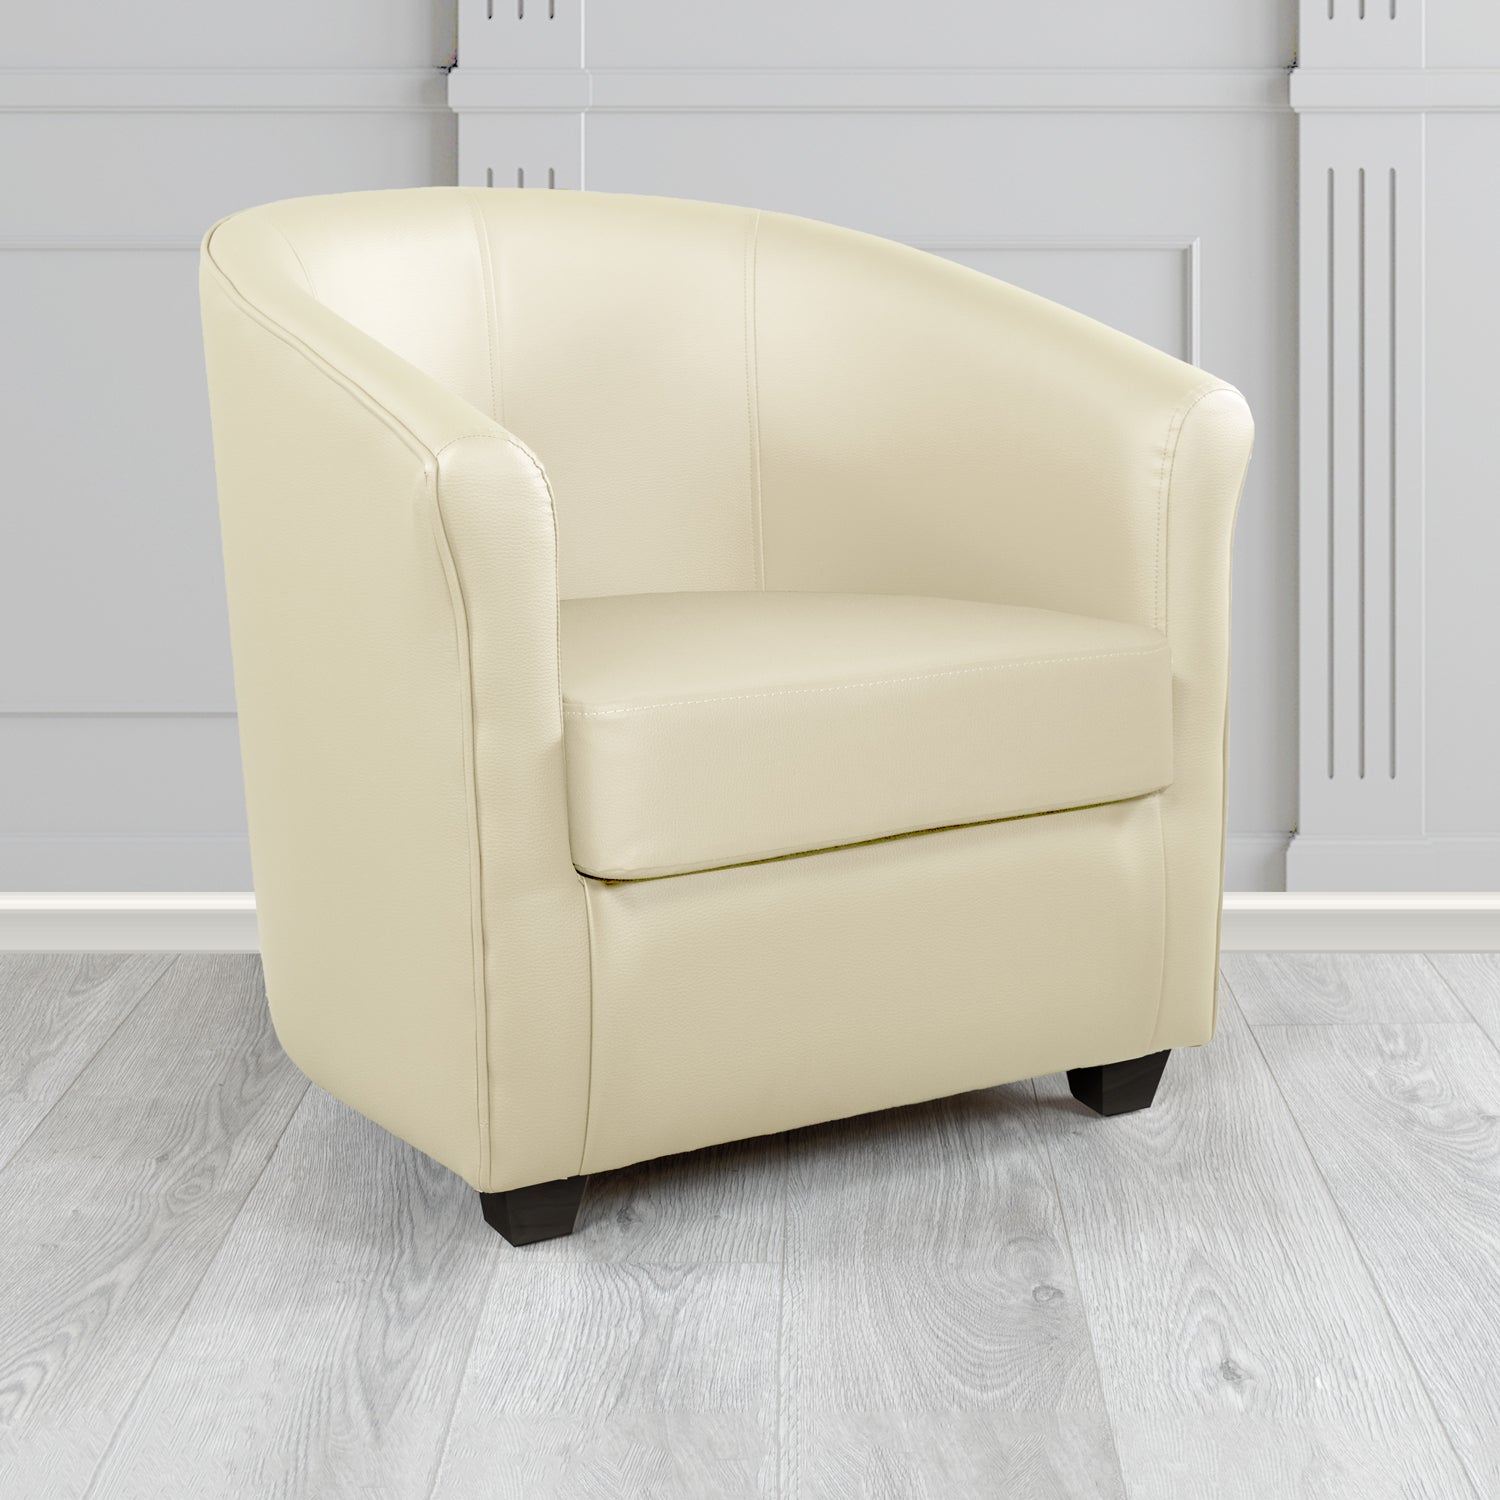 Cannes Tub Chair in Madrid Cream Faux Leather - The Tub Chair Shop